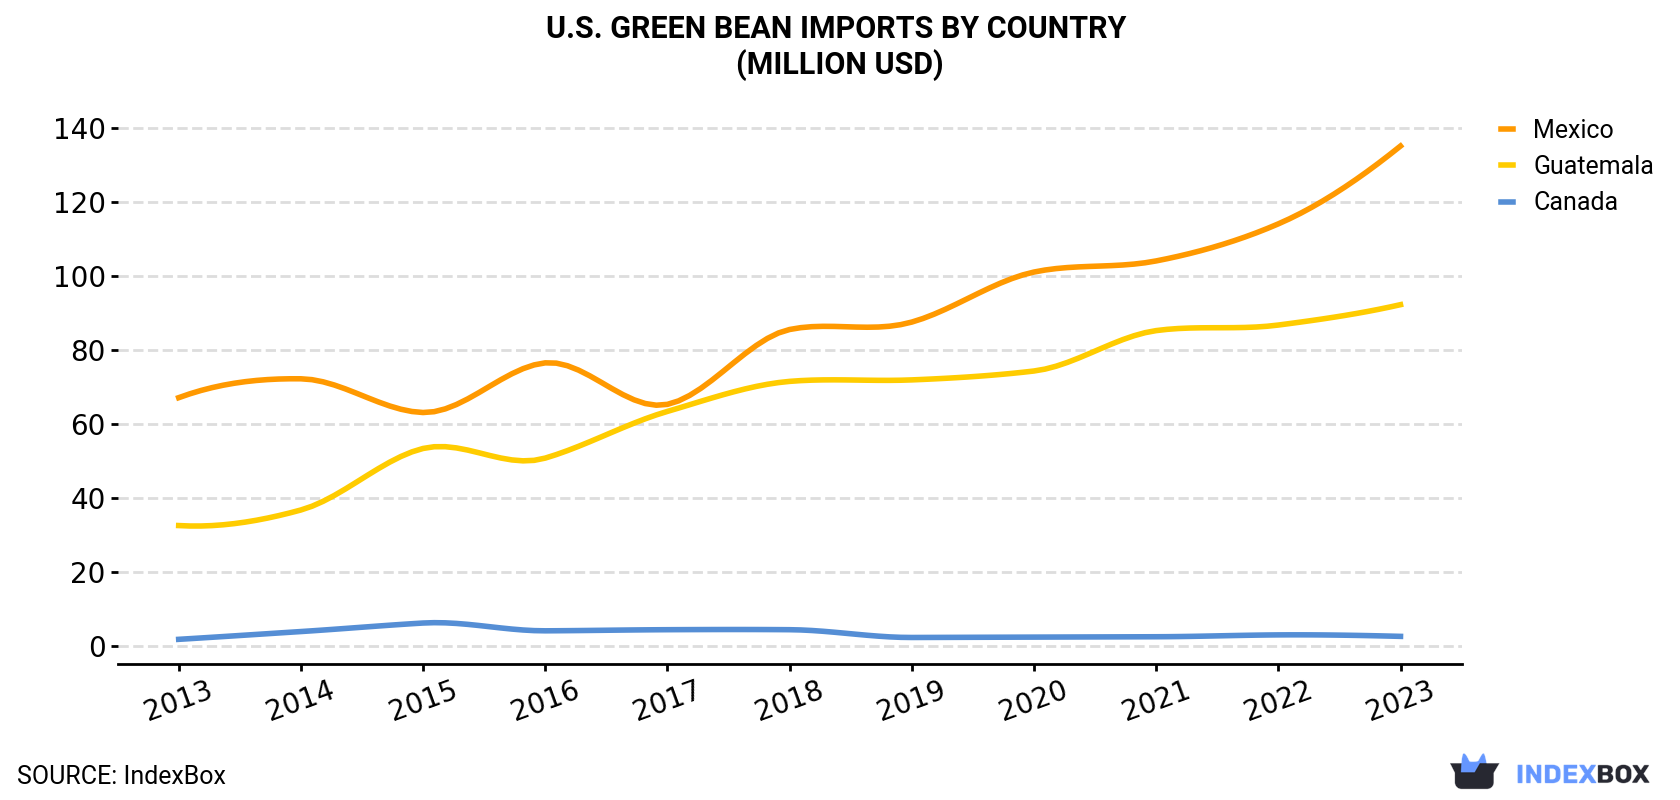 U.S. Green Bean Imports By Country (Million USD)